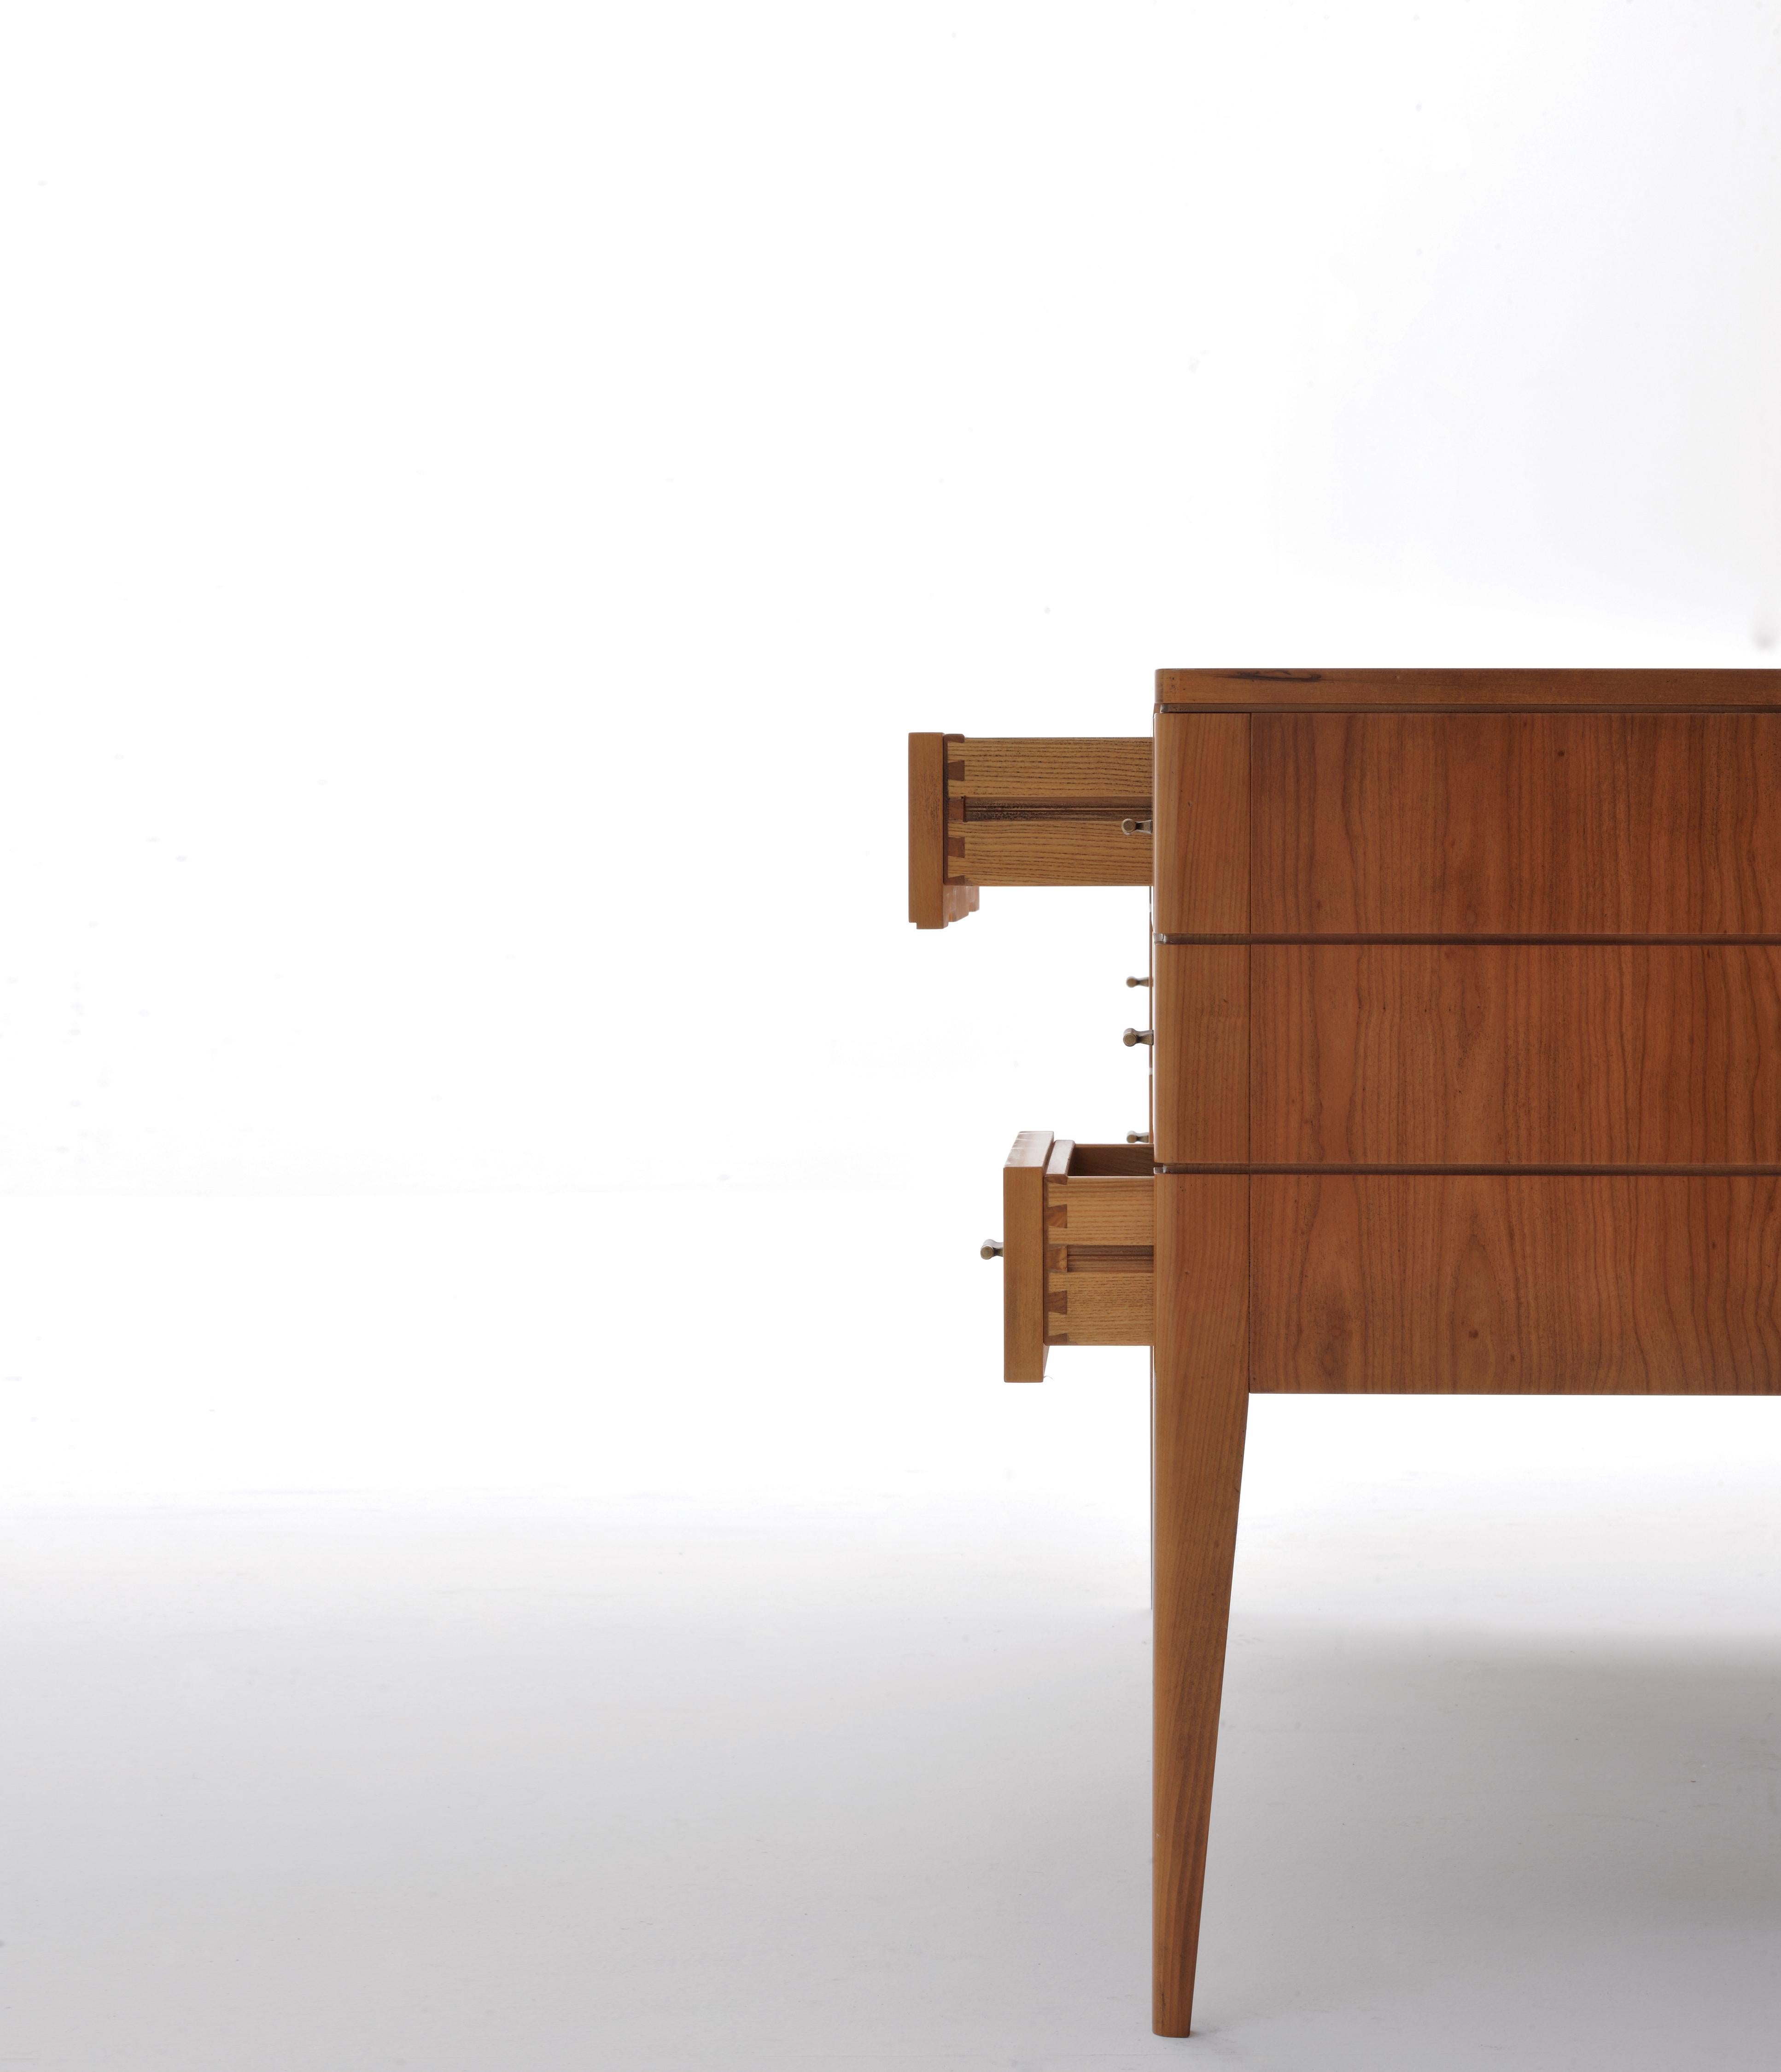 Hand-Crafted '900 Style Wooden Desk in Cherrywood by Morelato